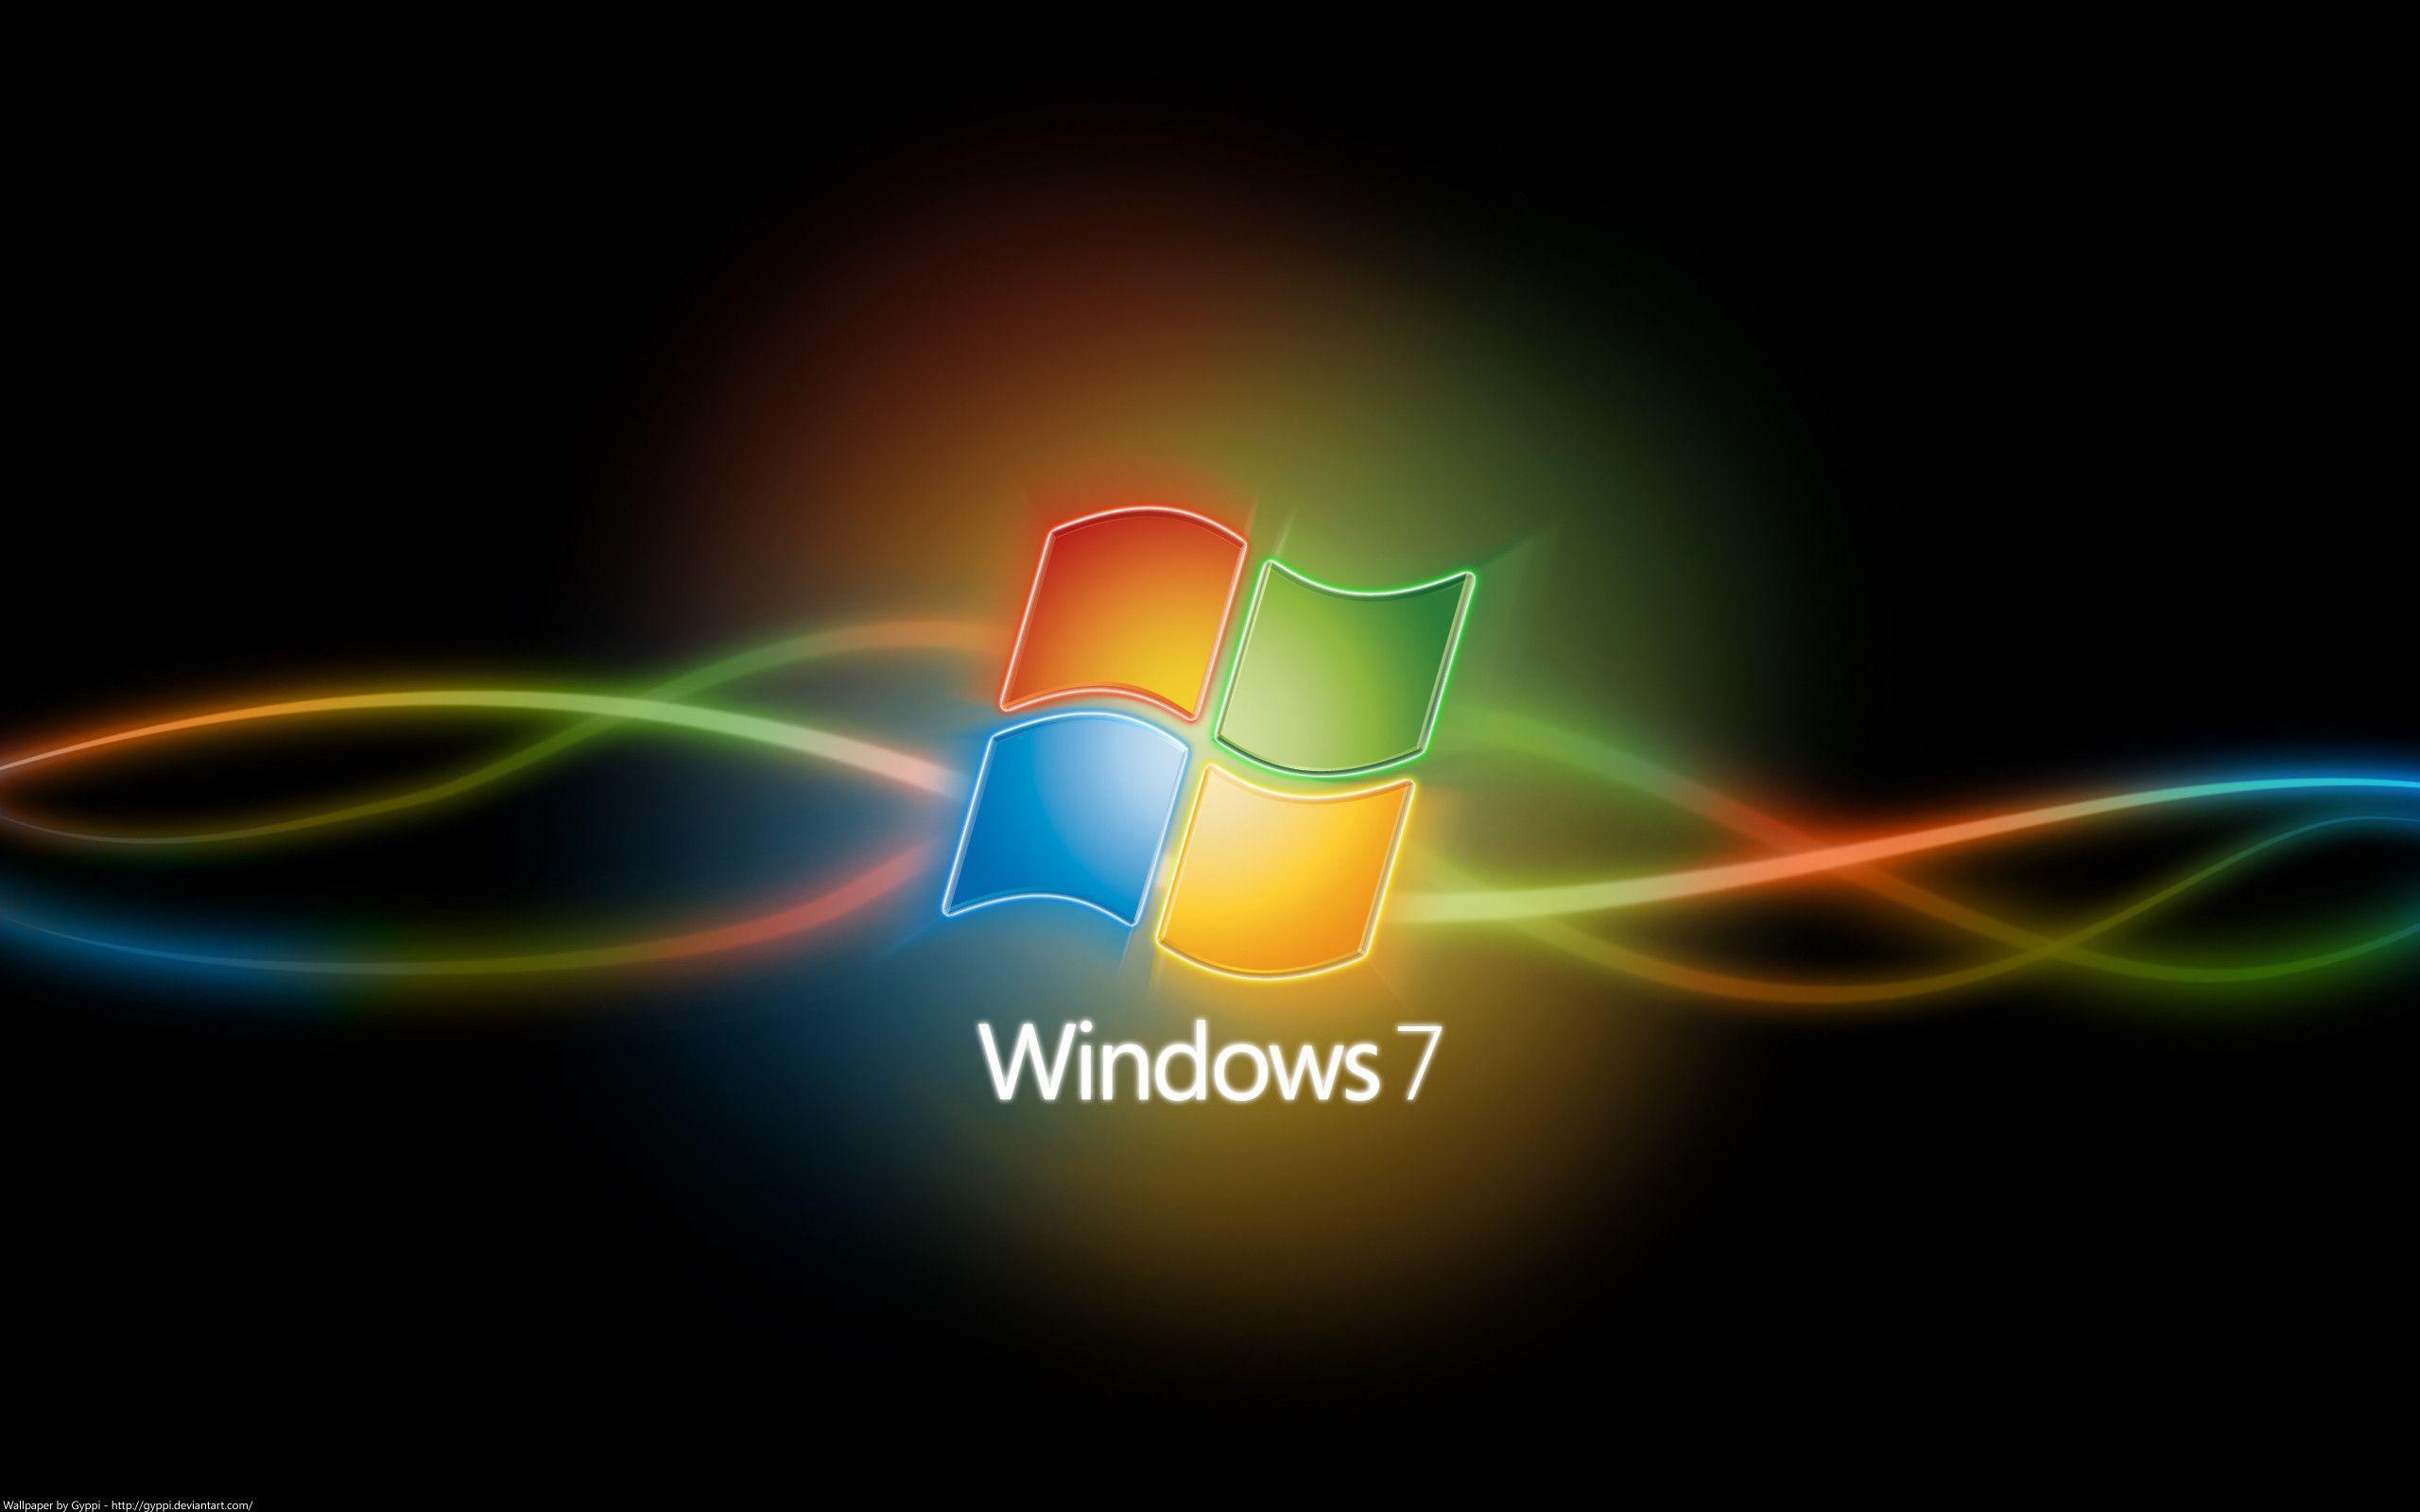 Windows 7 Color Picture And Wallpaper, Free Widescreen HD wallpaper